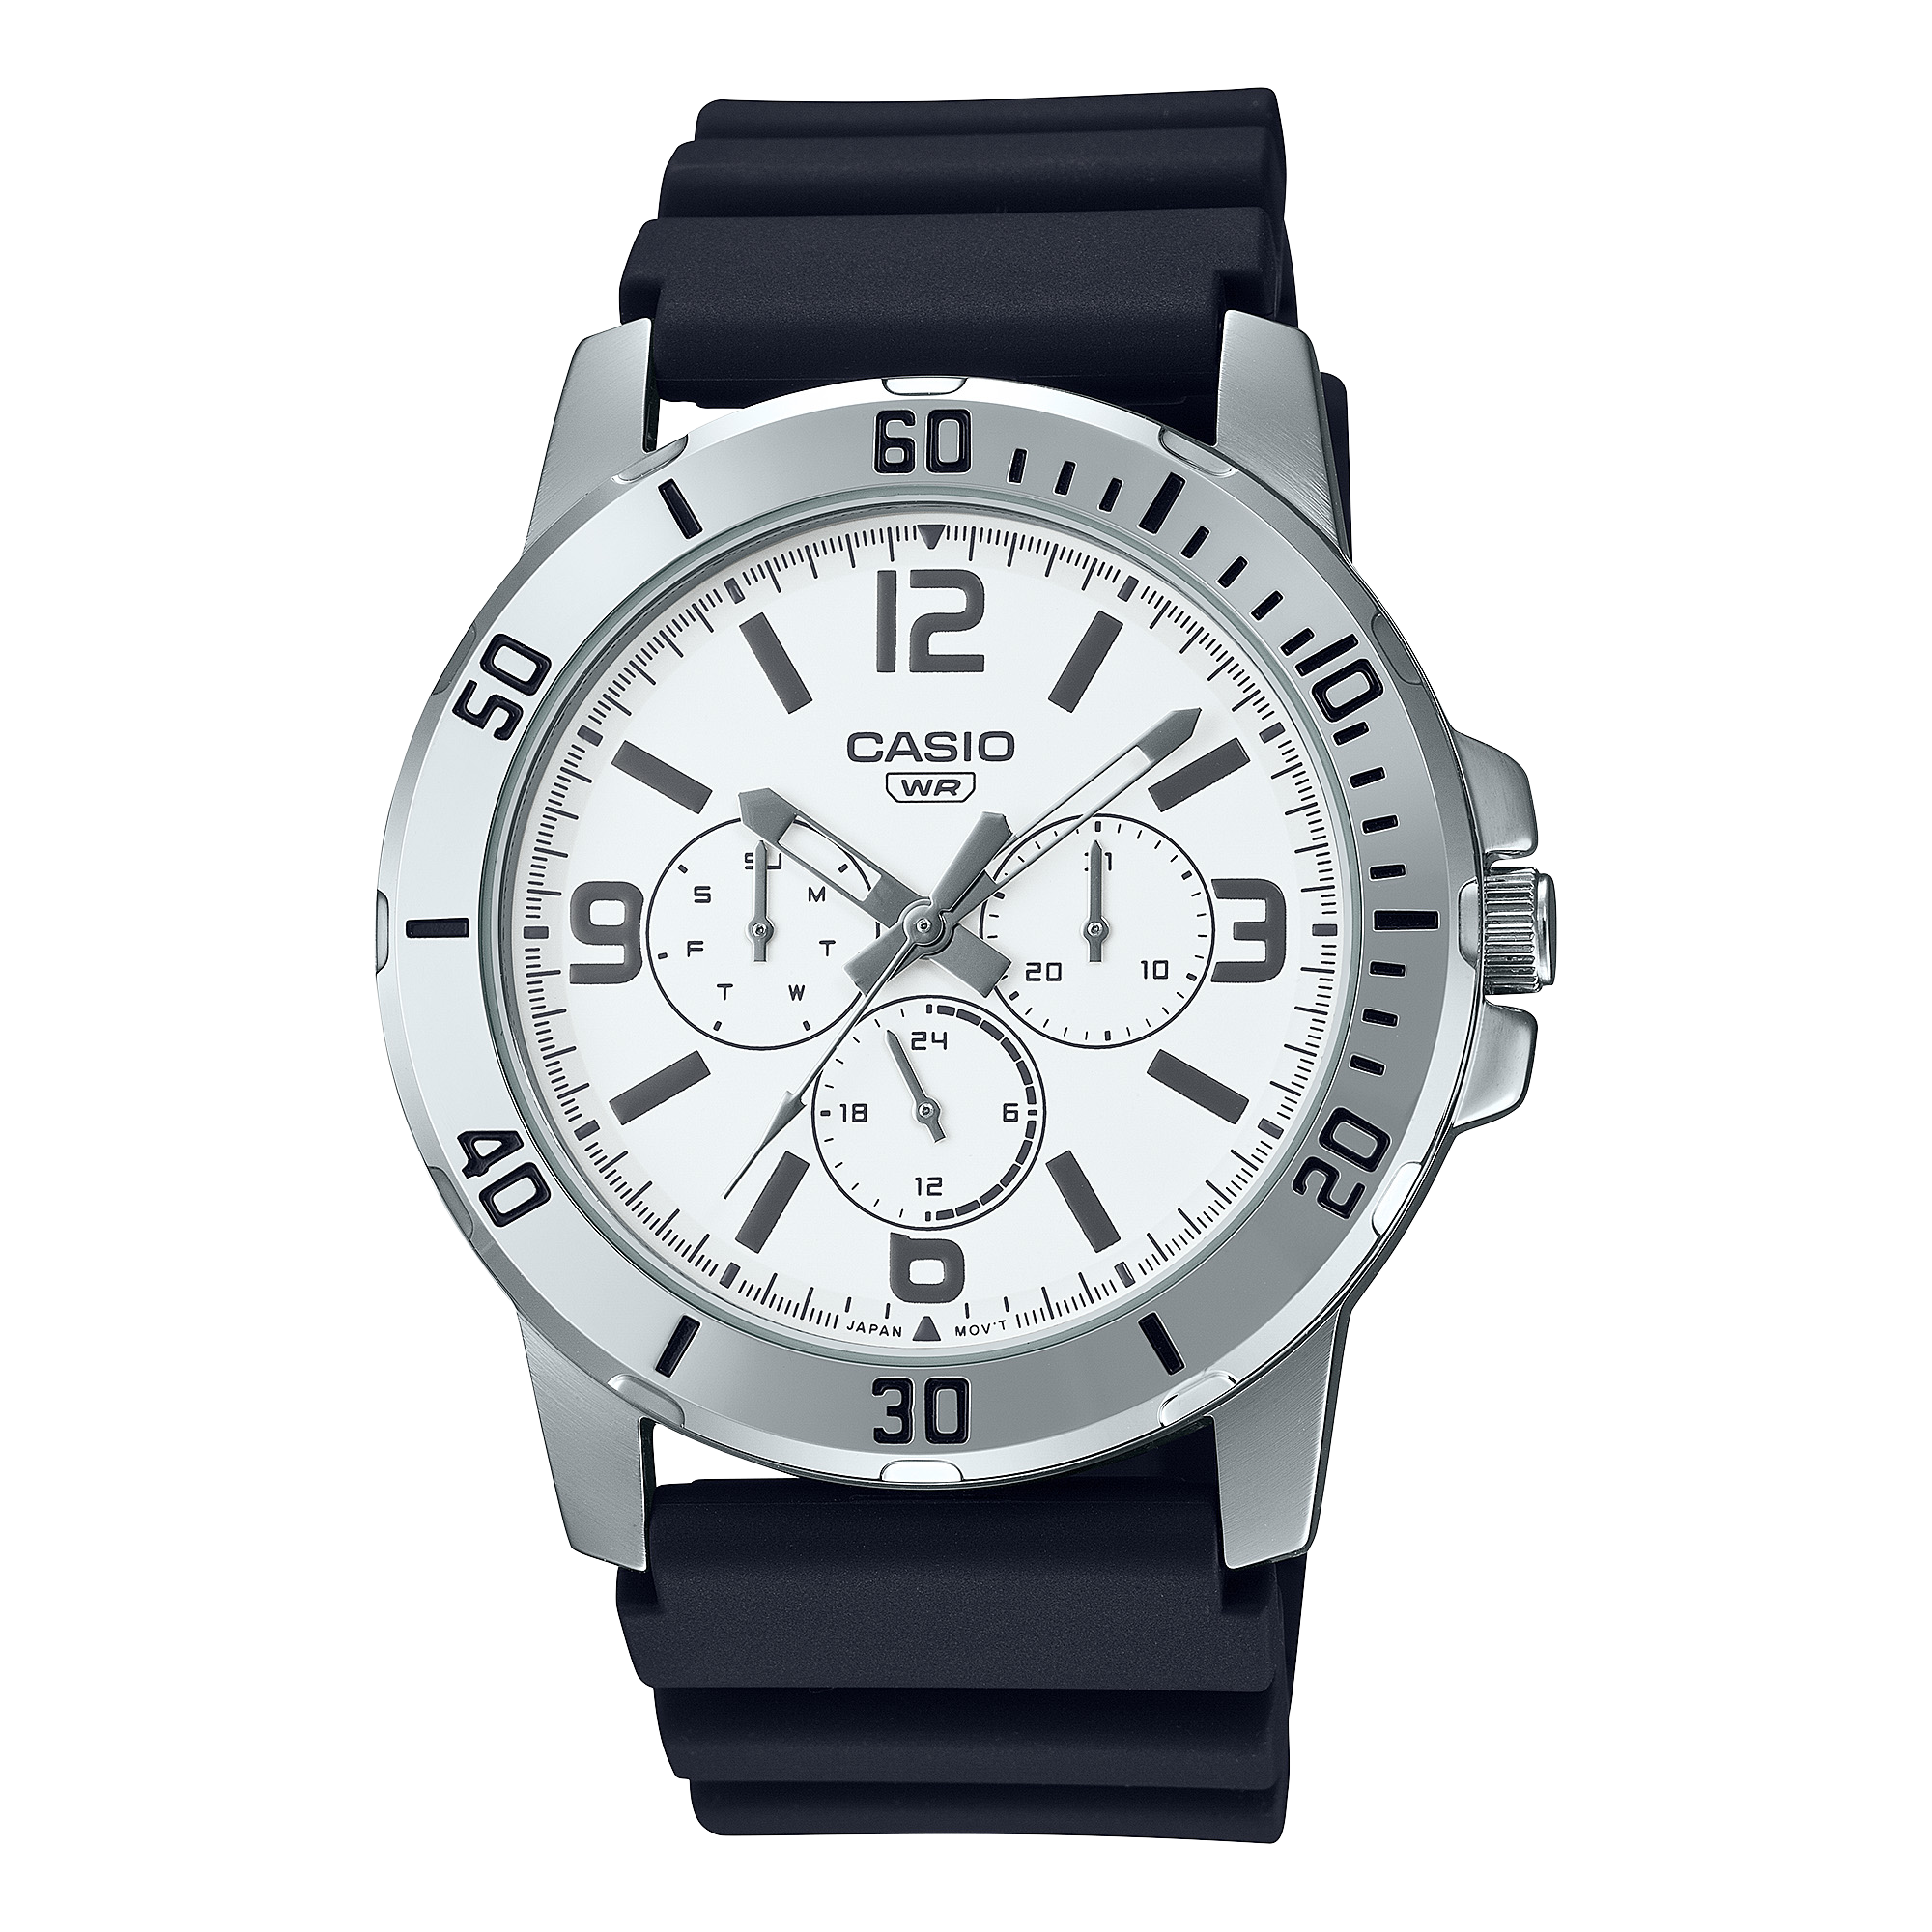 Casio MTP-VD300-7BUDF Stainless Steel Watch for Men